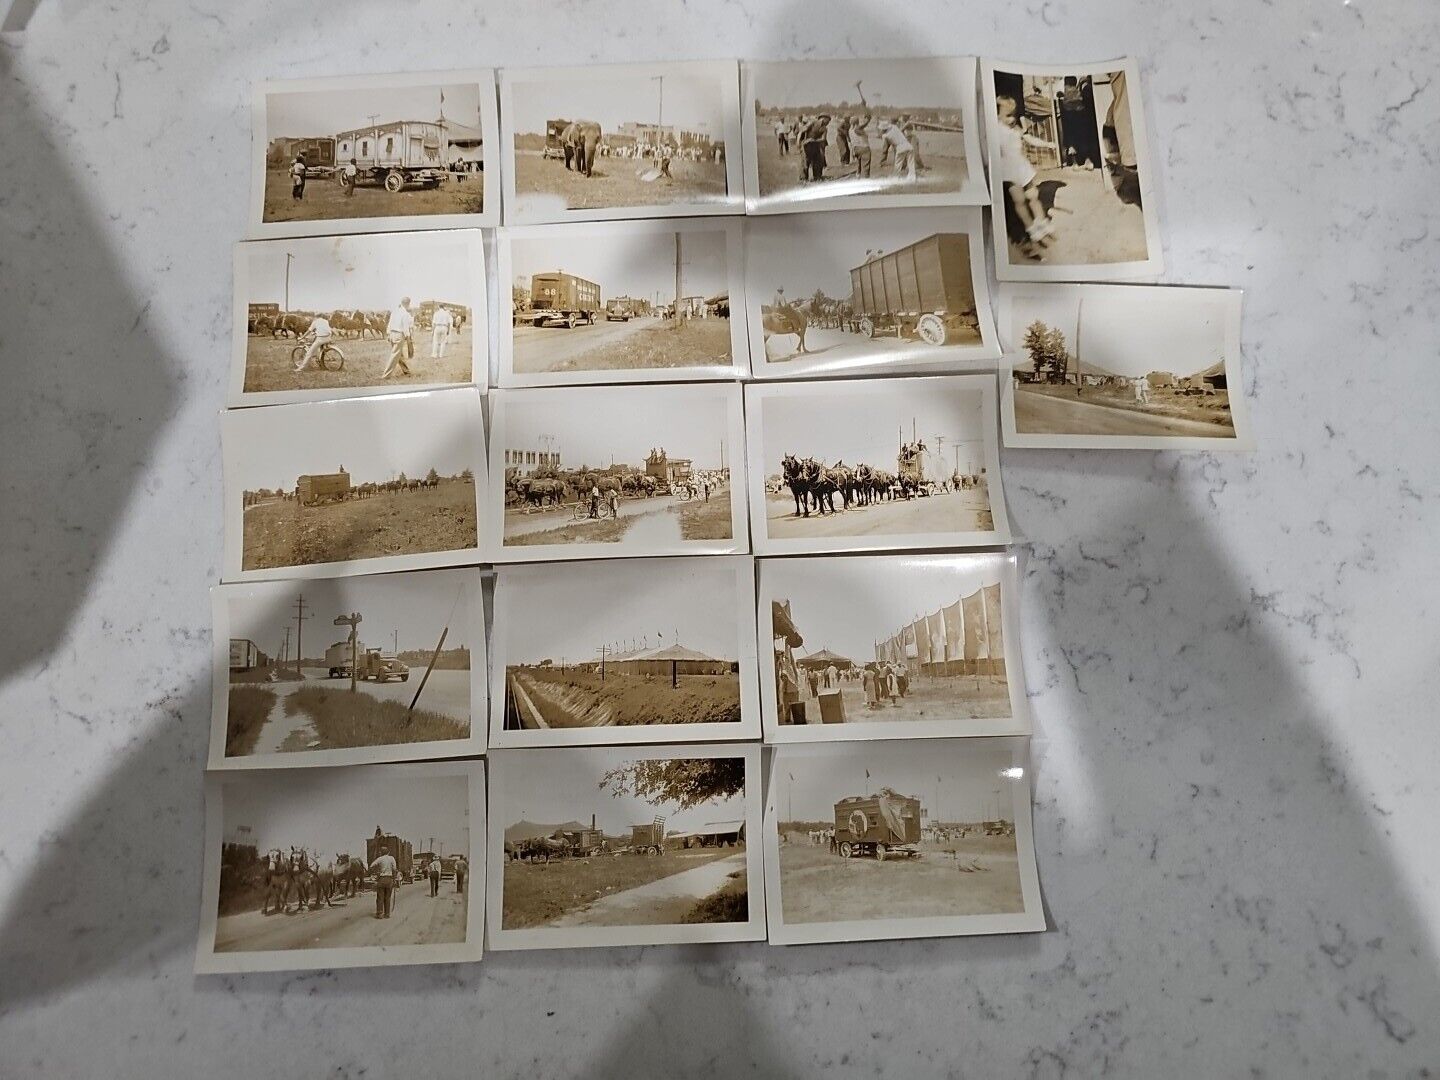 hagenbeck wallace circus photos 1937 Lot Of 17 Size 3 1/5 X 2 1/5 Inches Lot #2